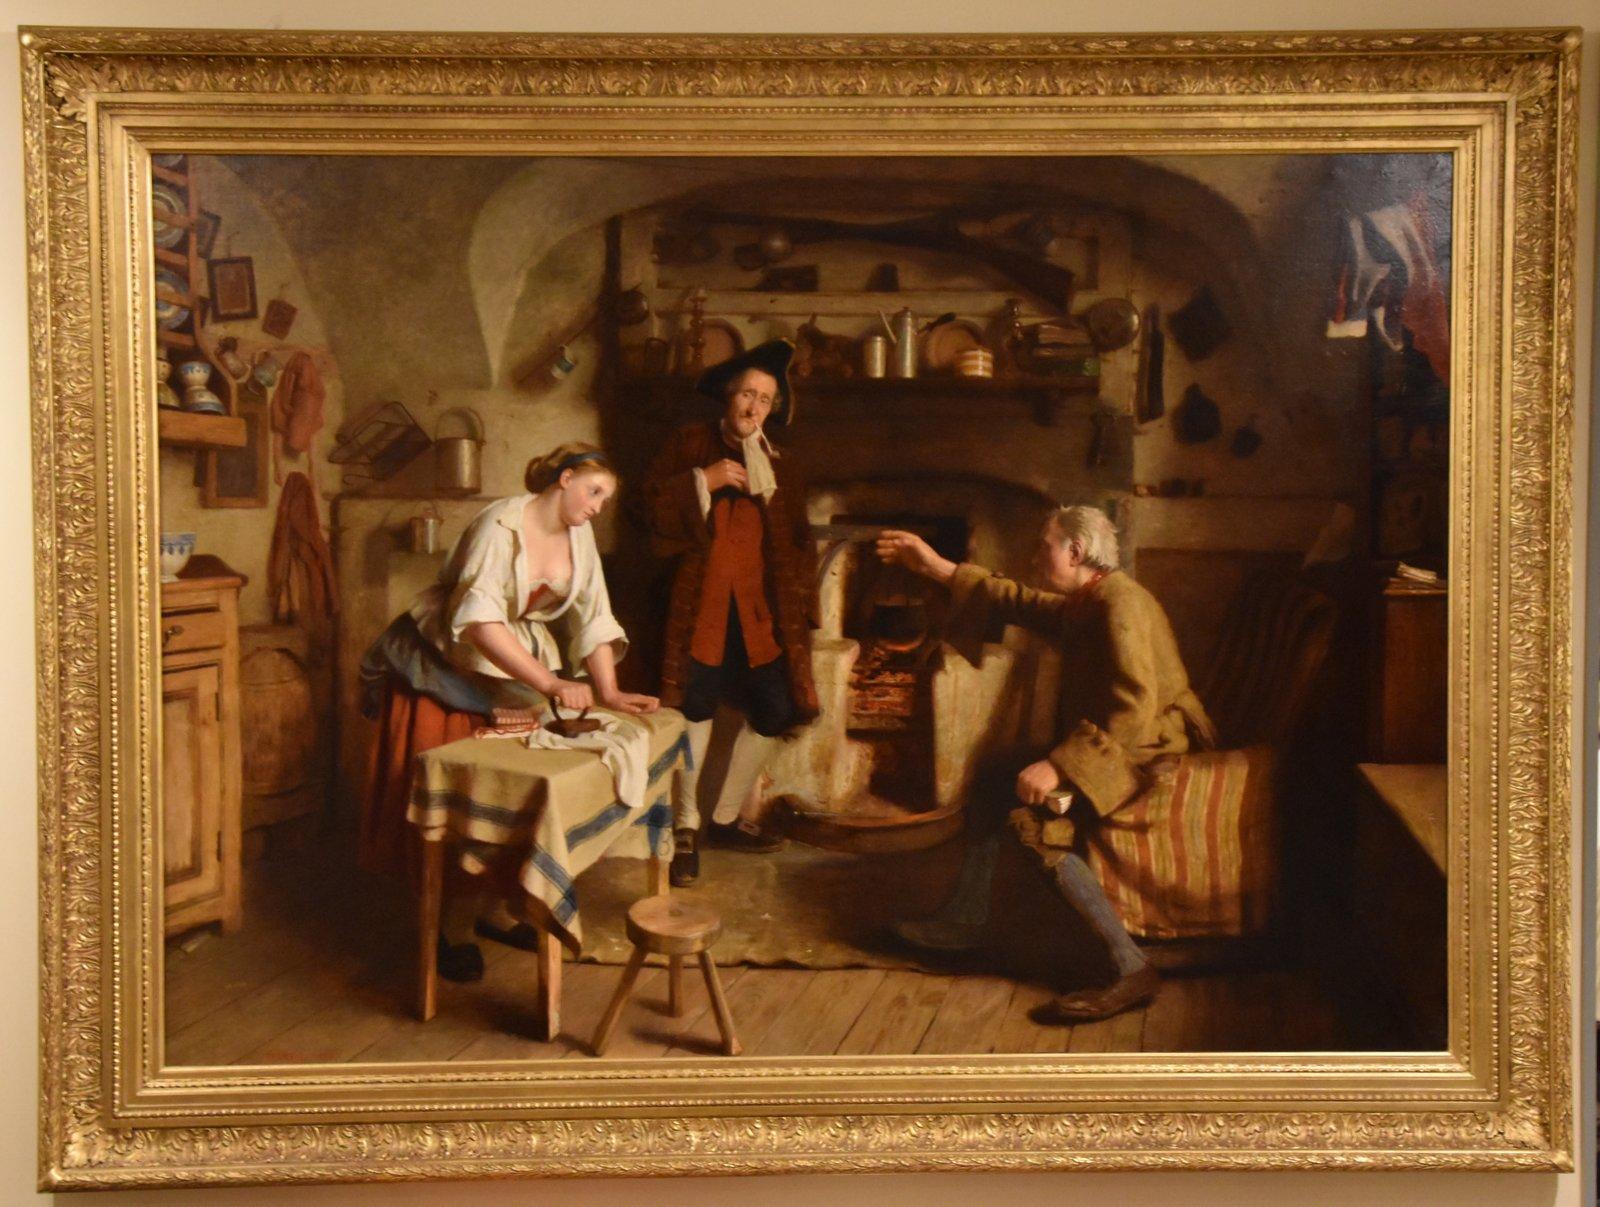 Oil Painting by William Baxter Collier Fyfe "The Laird of Dumbiedyke's Courtship" 1836 - 1882 Painter of historical and literary genre subjects and portraits. Exhibited at the Royal Academy, R.B.A. Oil on canvas. Signed and dated 1867 from the heart